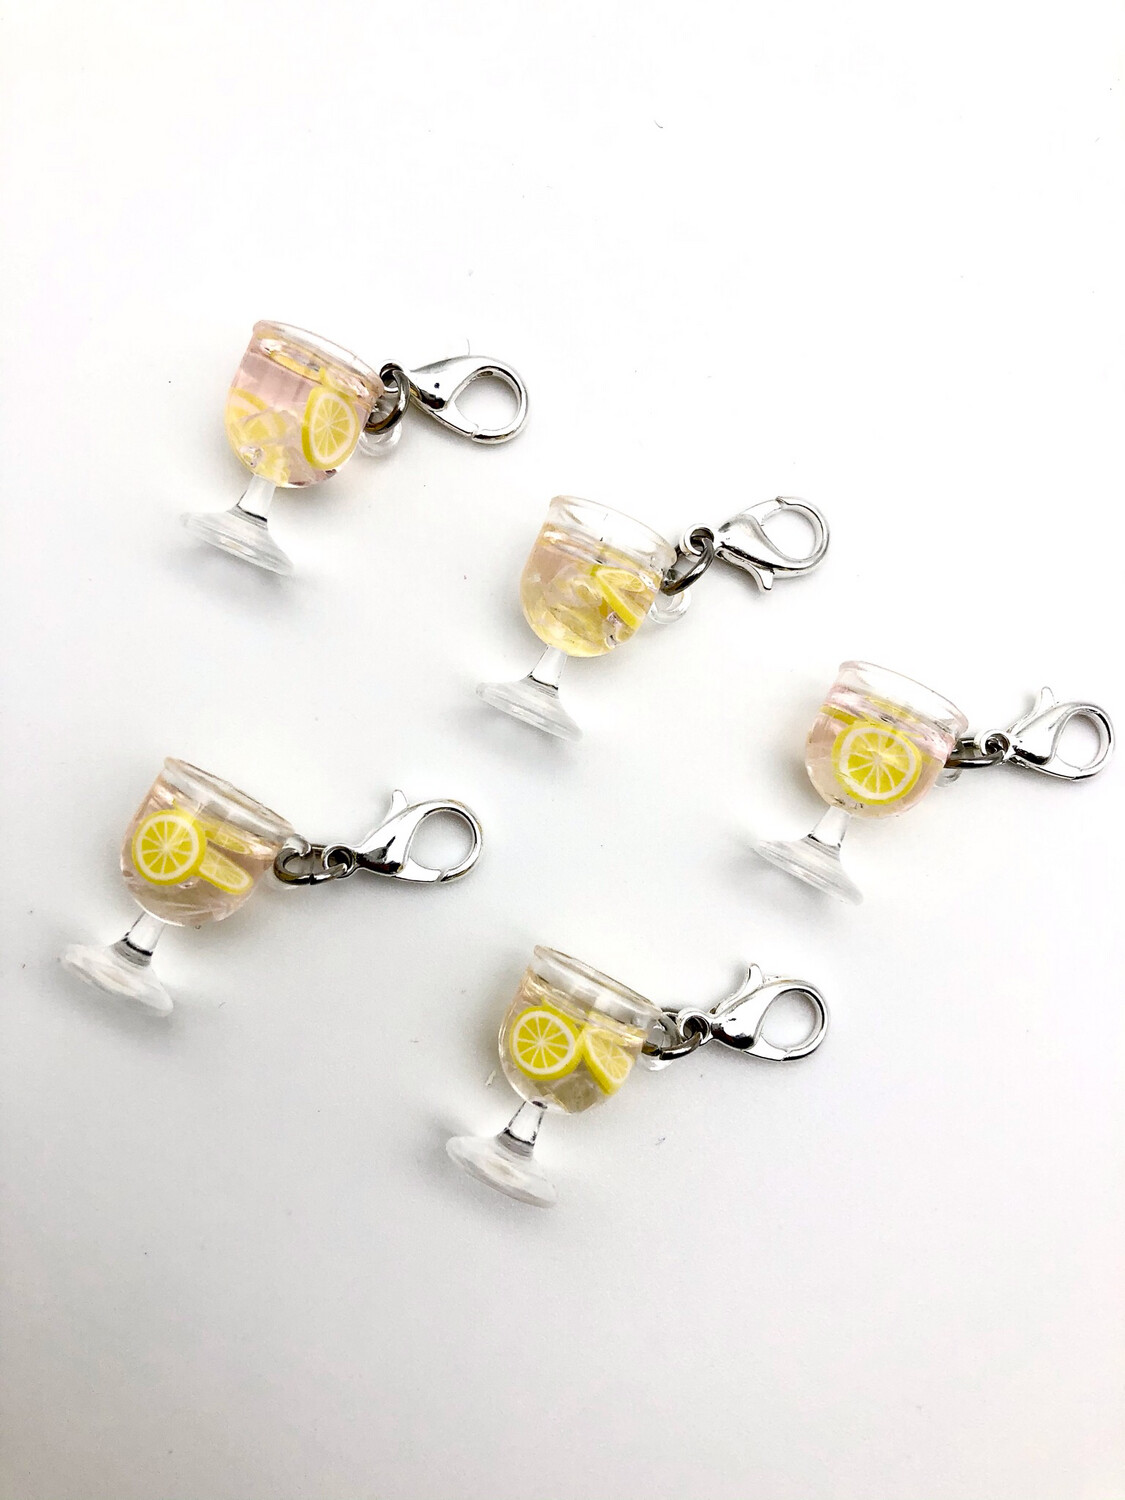 Gin With Lemons Gin and Tonic Stitch Markers - pack of 5